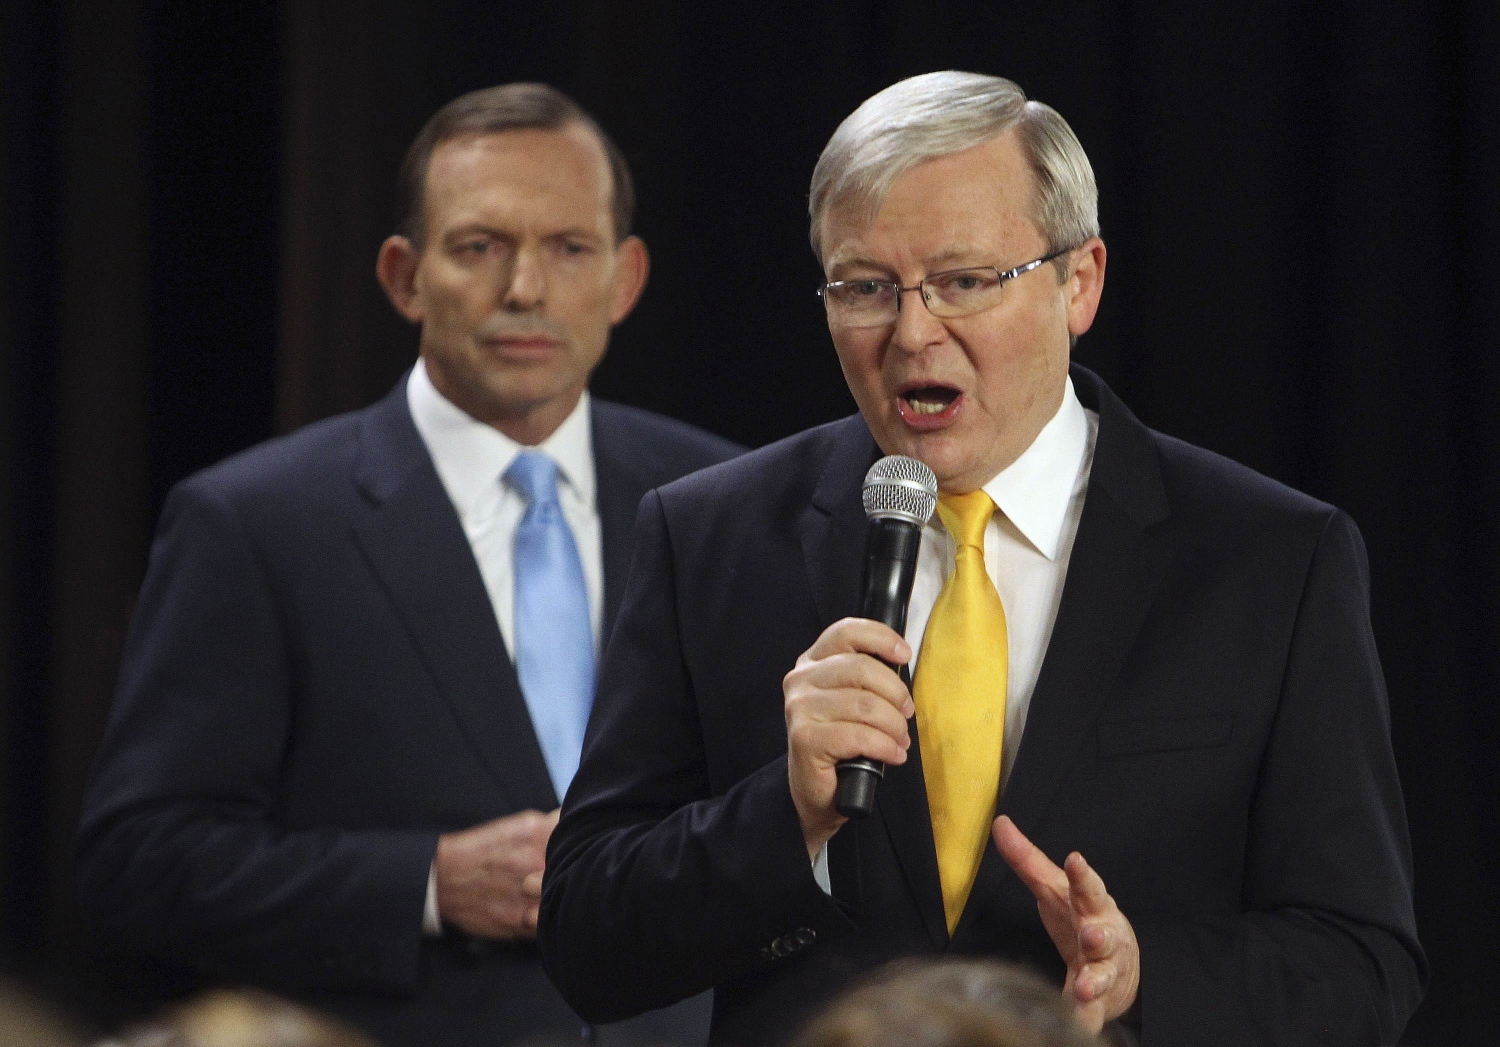 Australian Prime Minister and leader of the Australian Labor Party Kevin Rudd (right) speaks as Liberal Party leader Tony Abbott listens on. Photo: Reuters